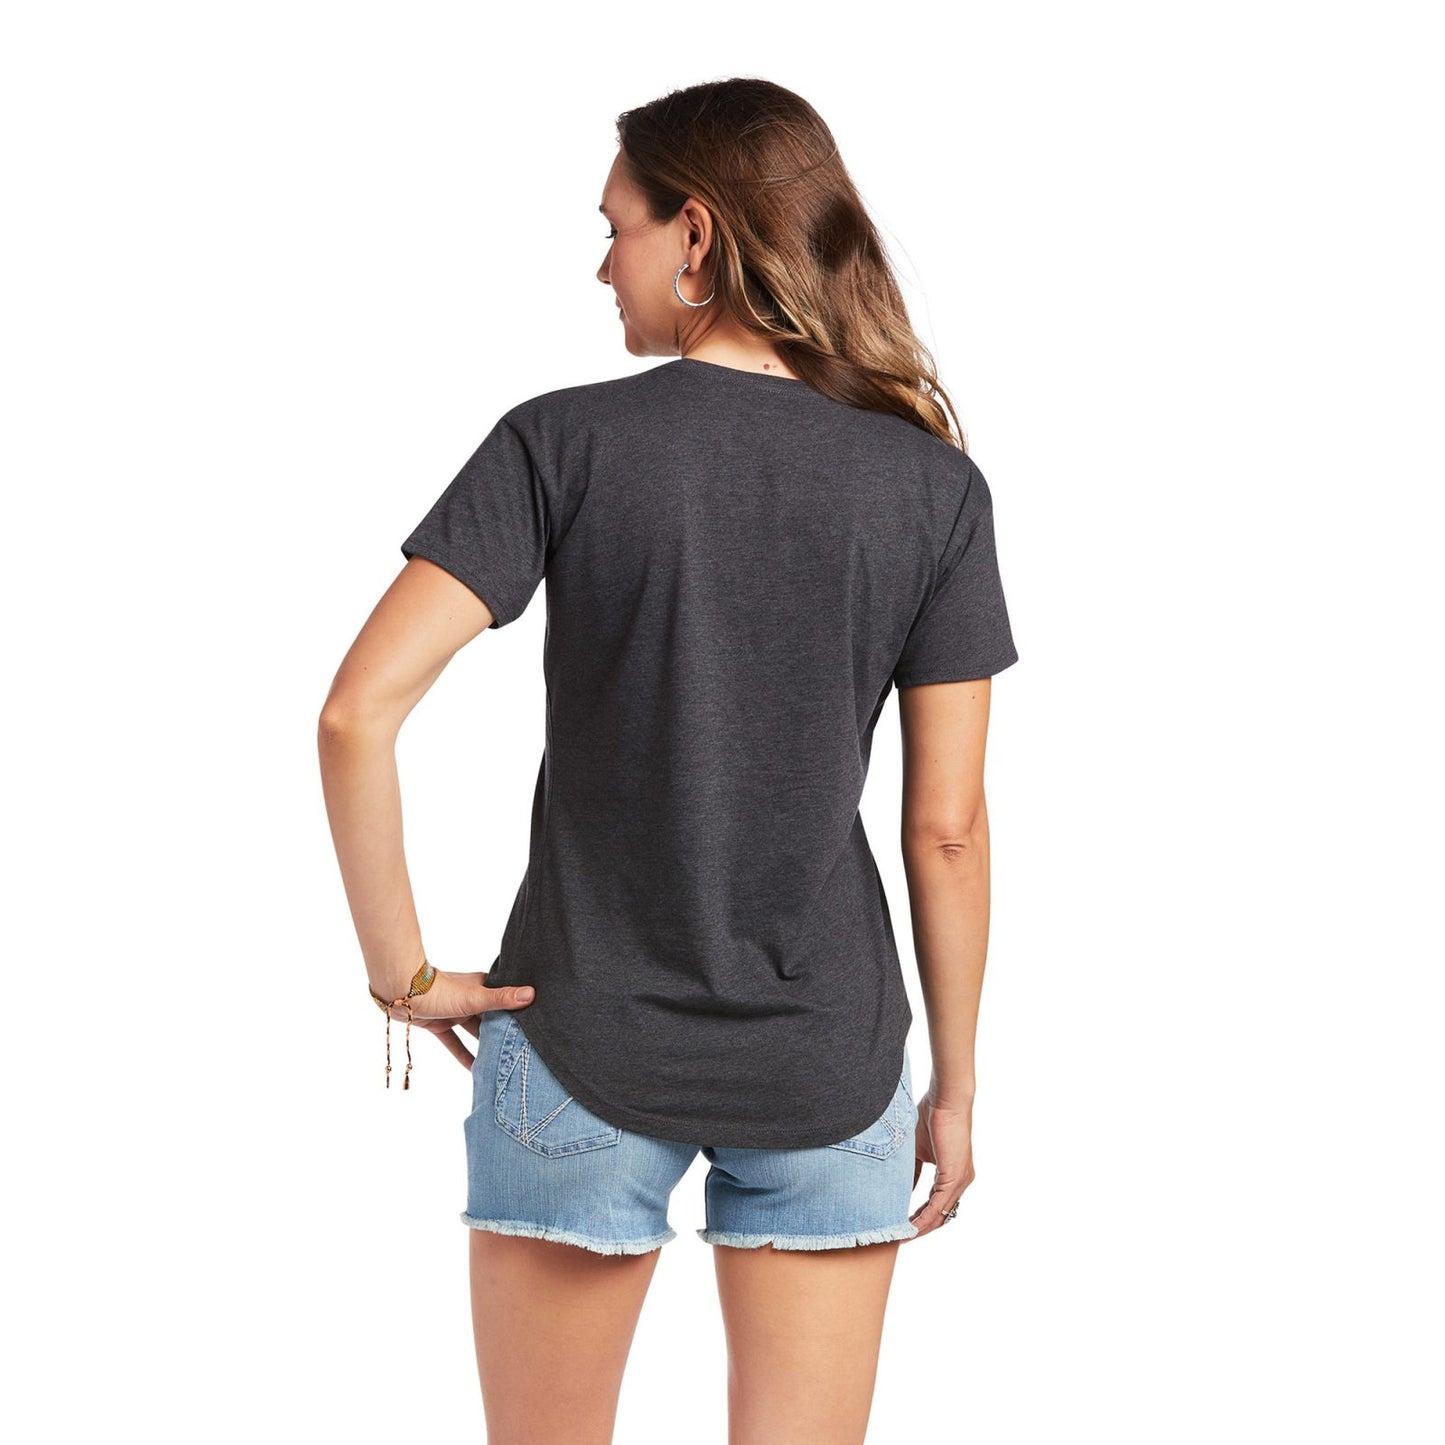 Ariat Wild Country Charcoal Heather T-Shirt